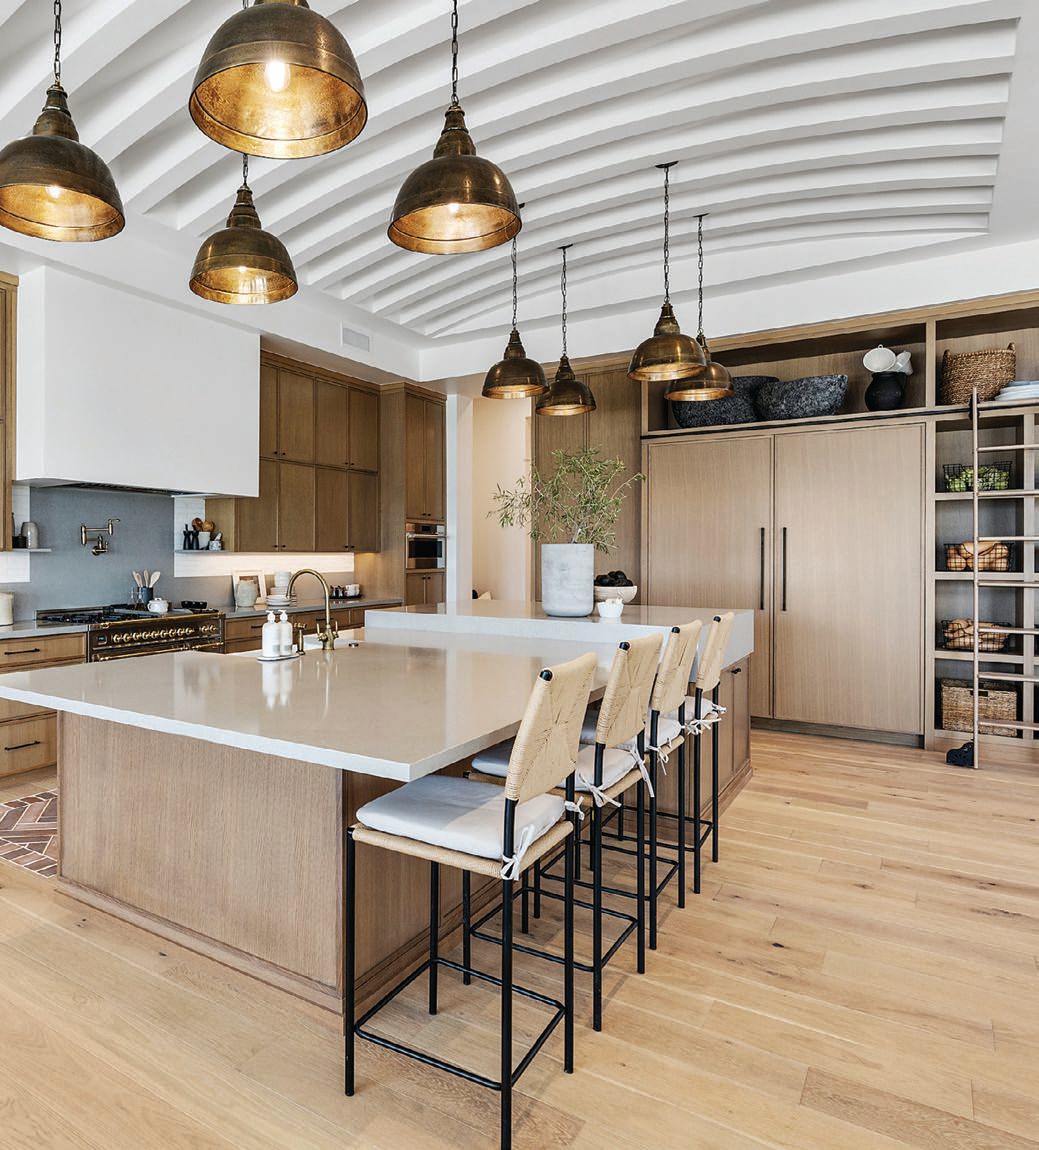 The stunning custom barrel beam ceiling treatment in the kitchen is one of a kind PHOTOGRAPHED BY DESERT LENSES PHOTOGRAPHY